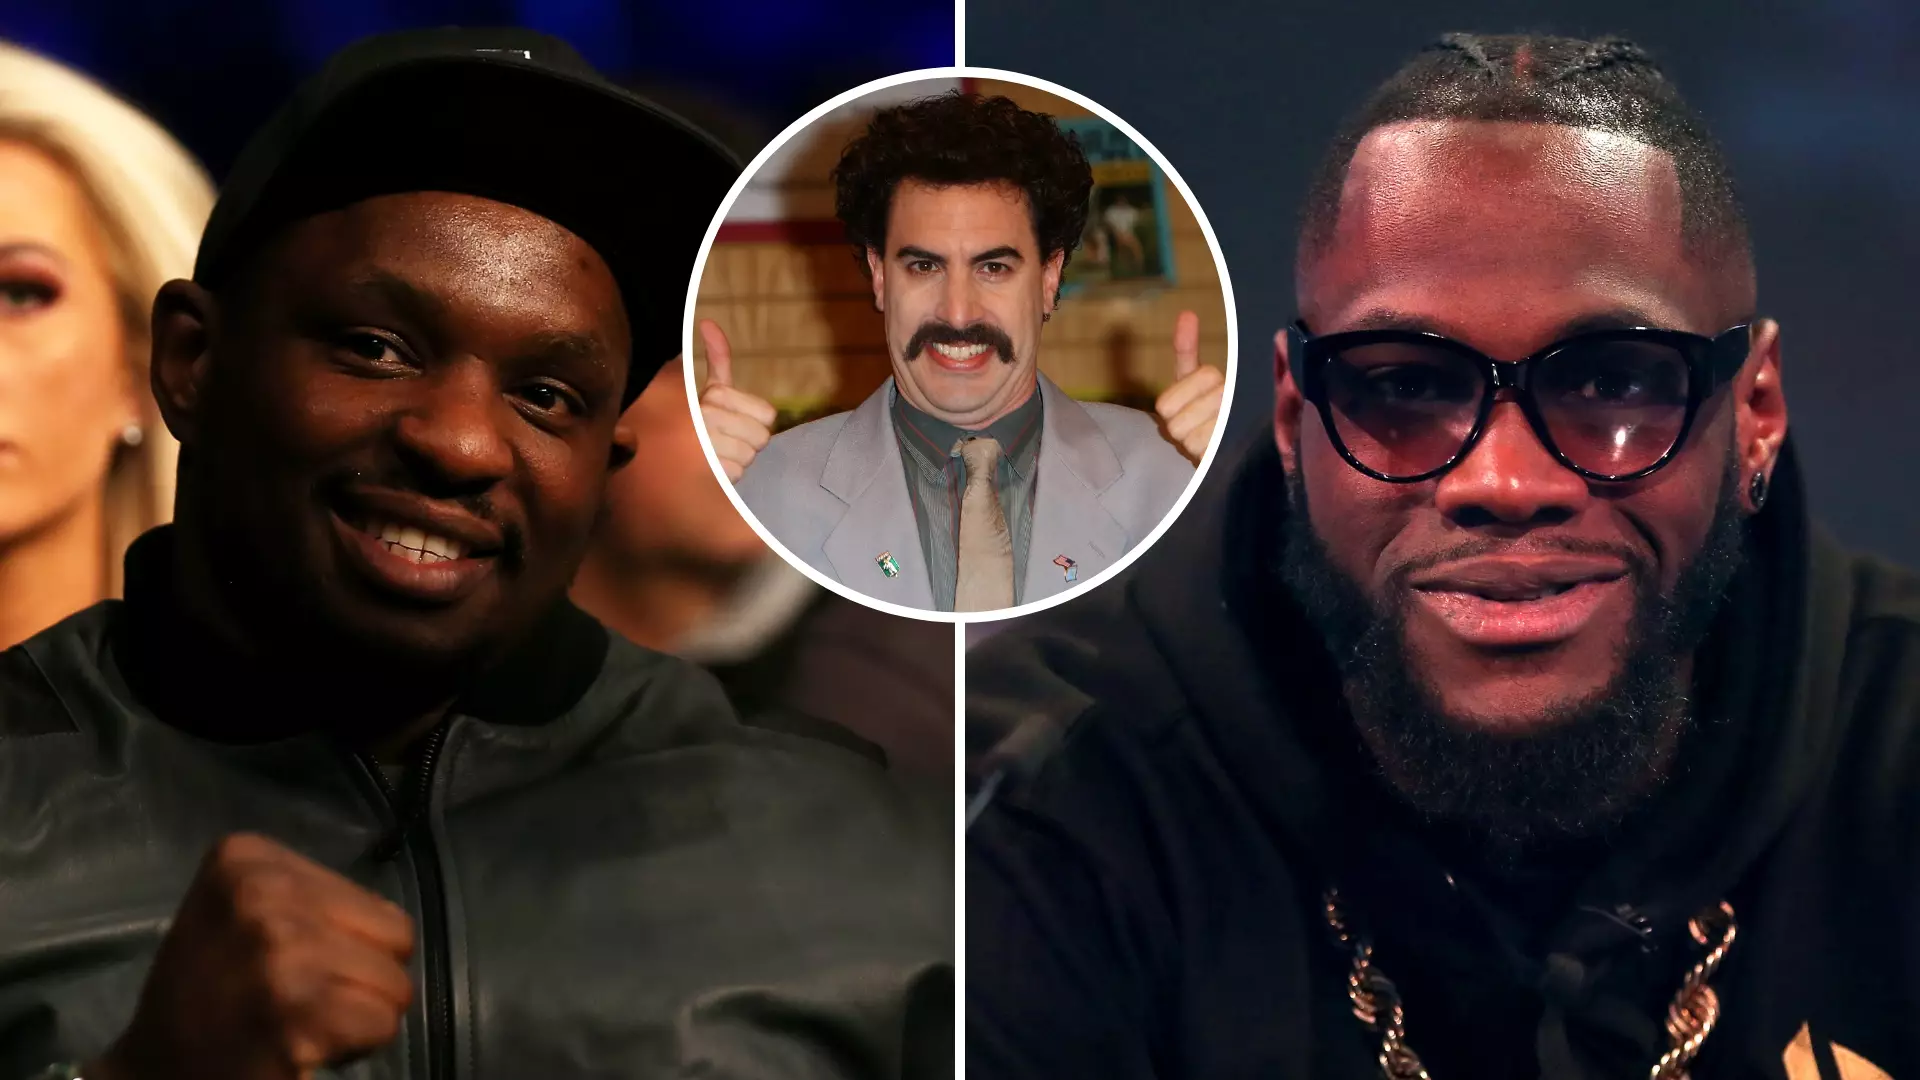 Dillian Whyte Calls Deontay Wilder An ‘Absolute Weapon’ After His ‘Borat’ English Accent